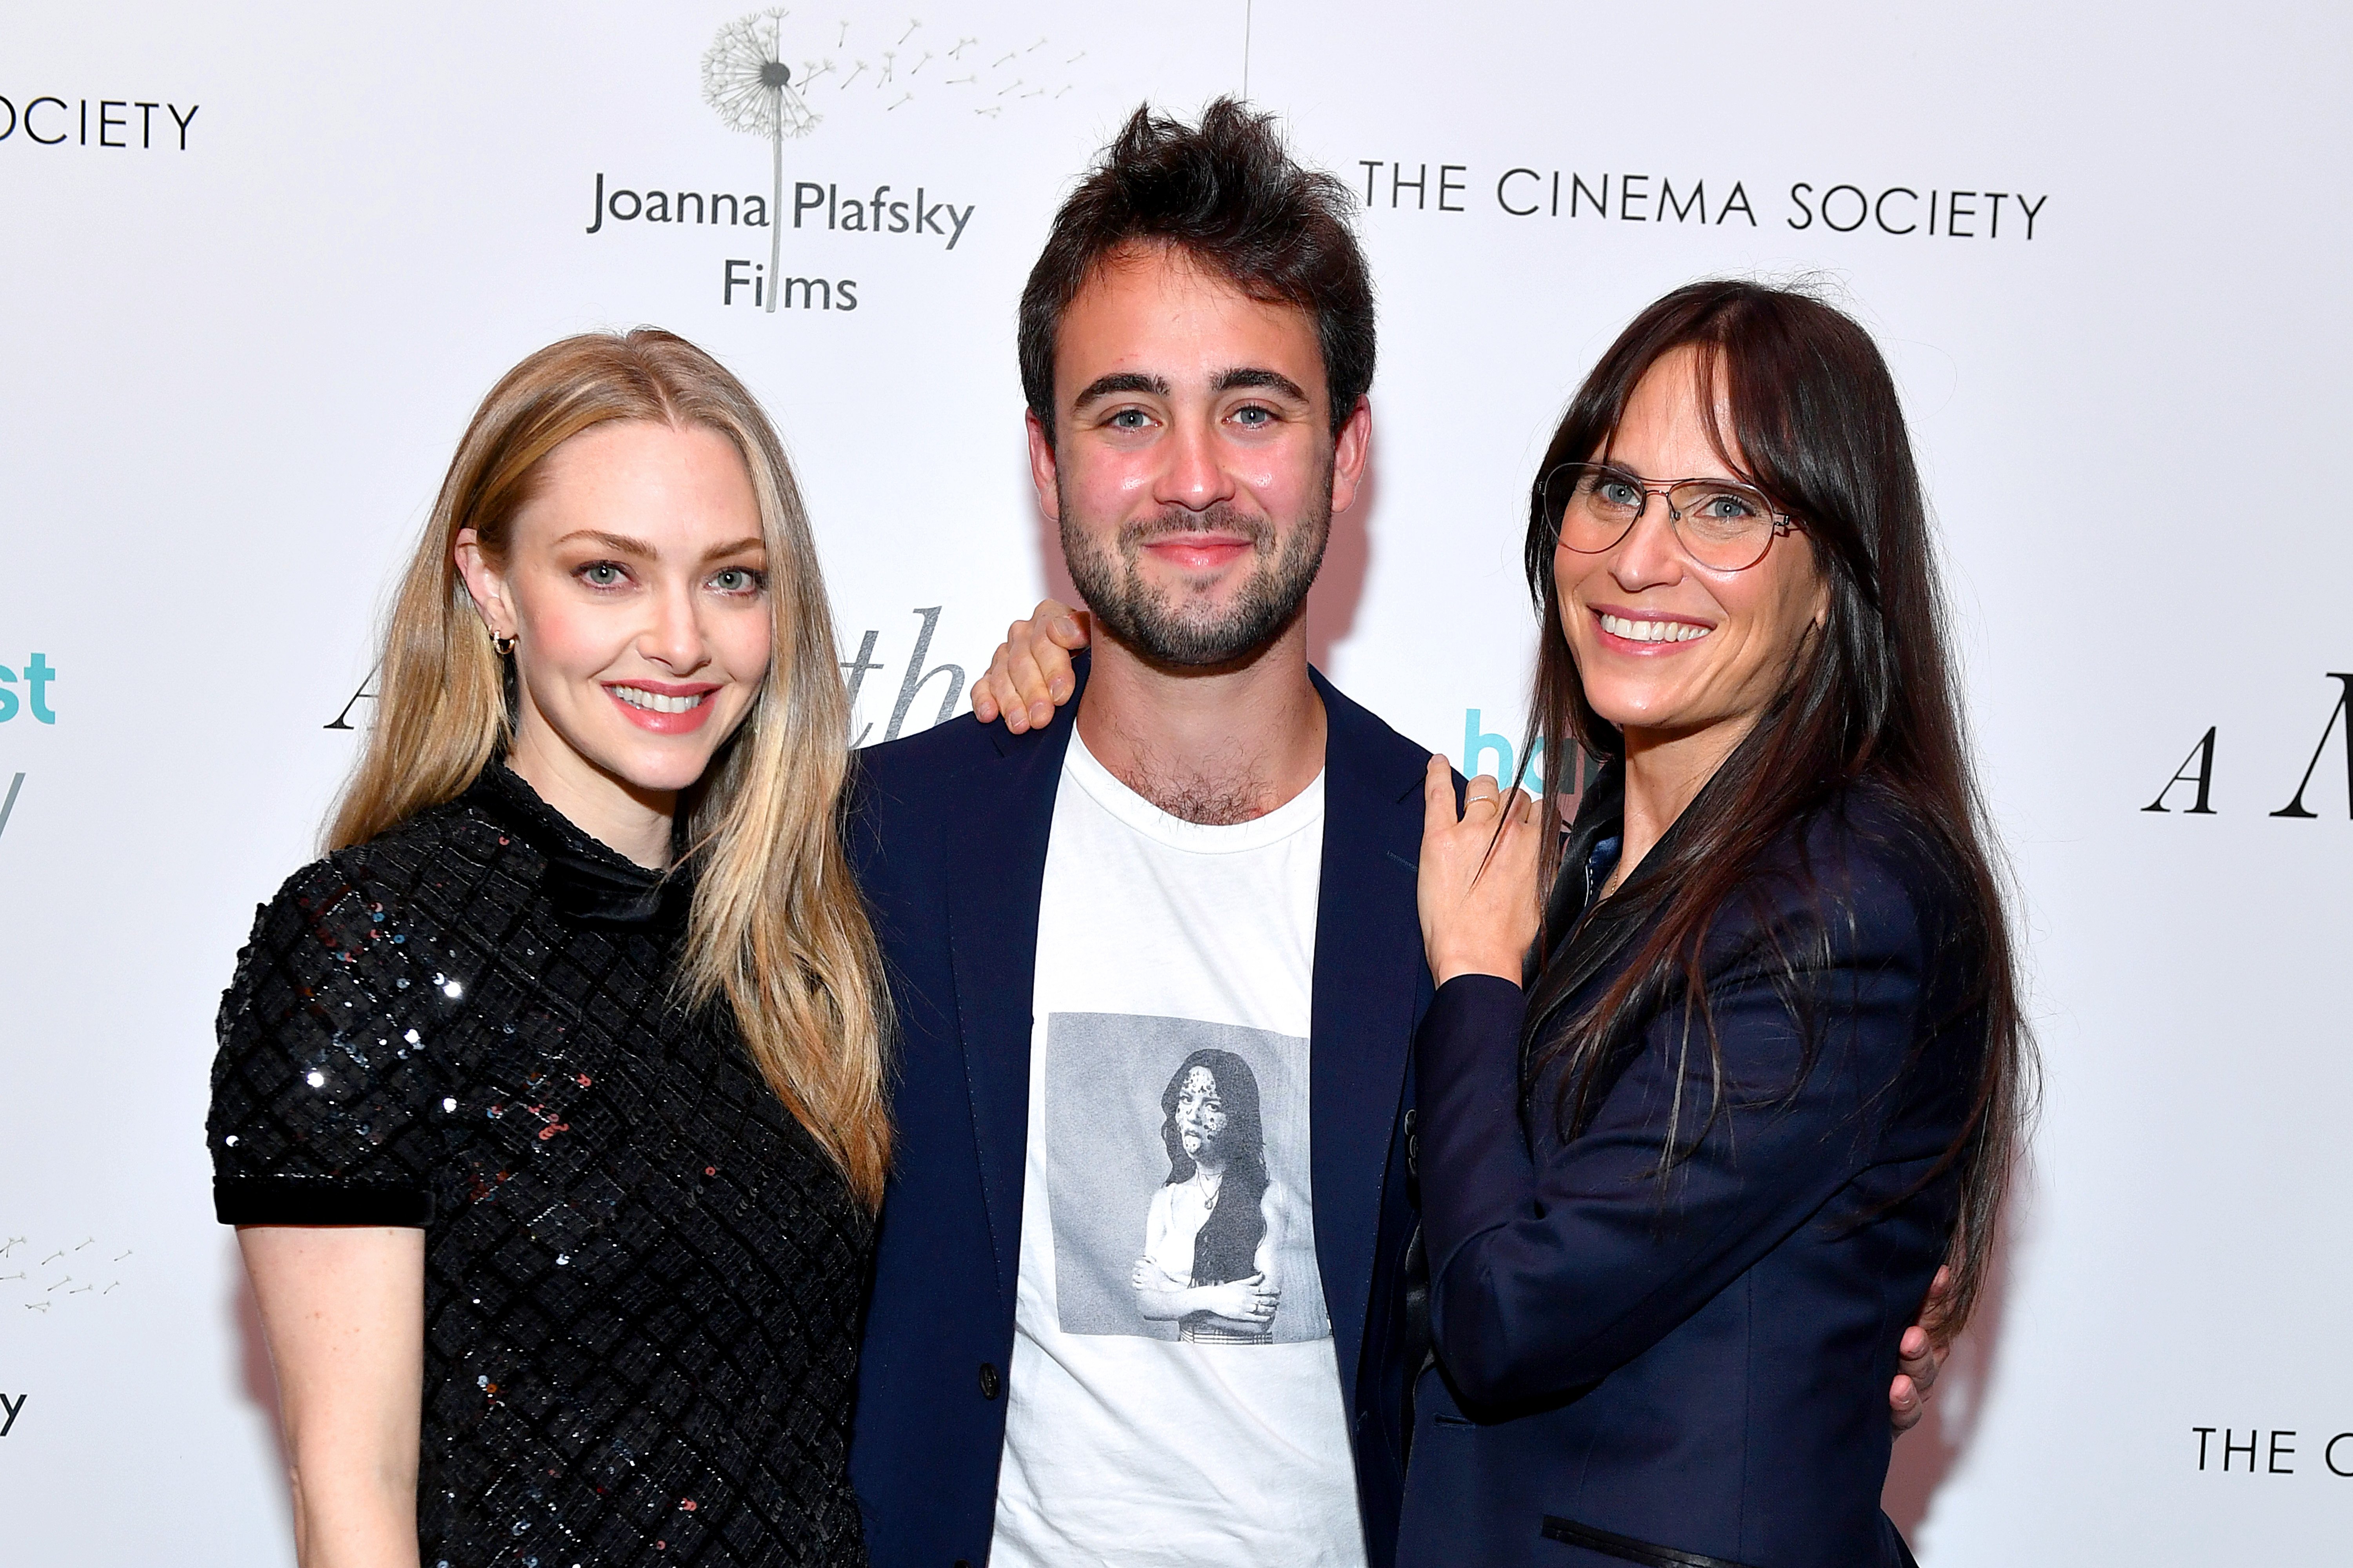 Amanda Seyfried, Sam Koppelman, and Amy Koppelman at the screening of "A Mouthful Of Air" on October 24, 2021 | Source: Getty Images